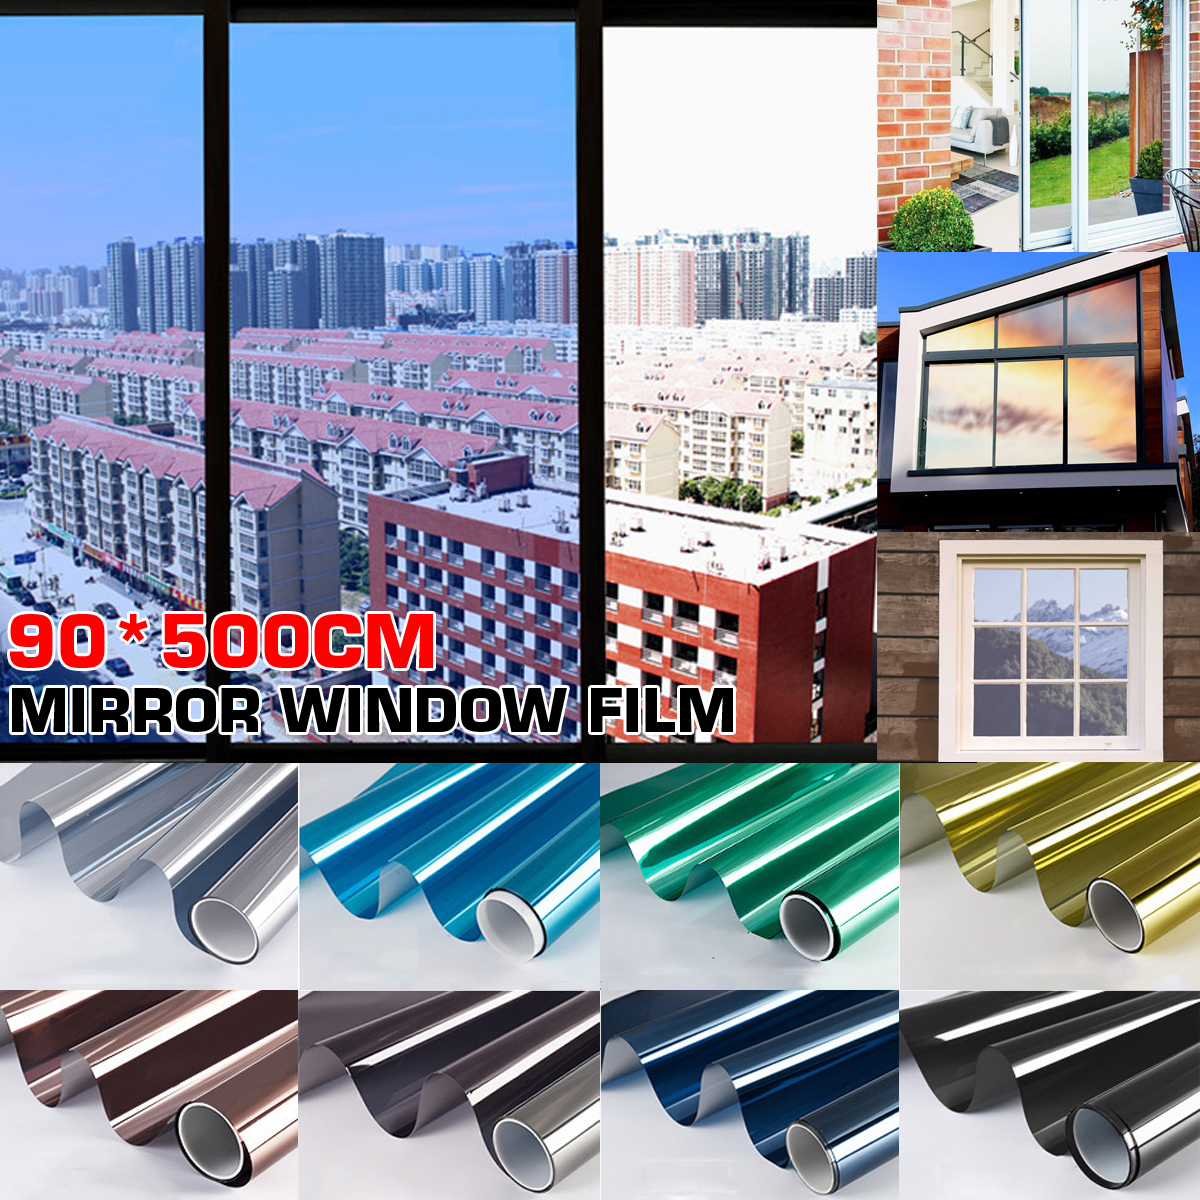 Windows-Tint-Film-UV-proof-Privacy-Protection-Heat-Insulation-Glass-Films-1696241-1